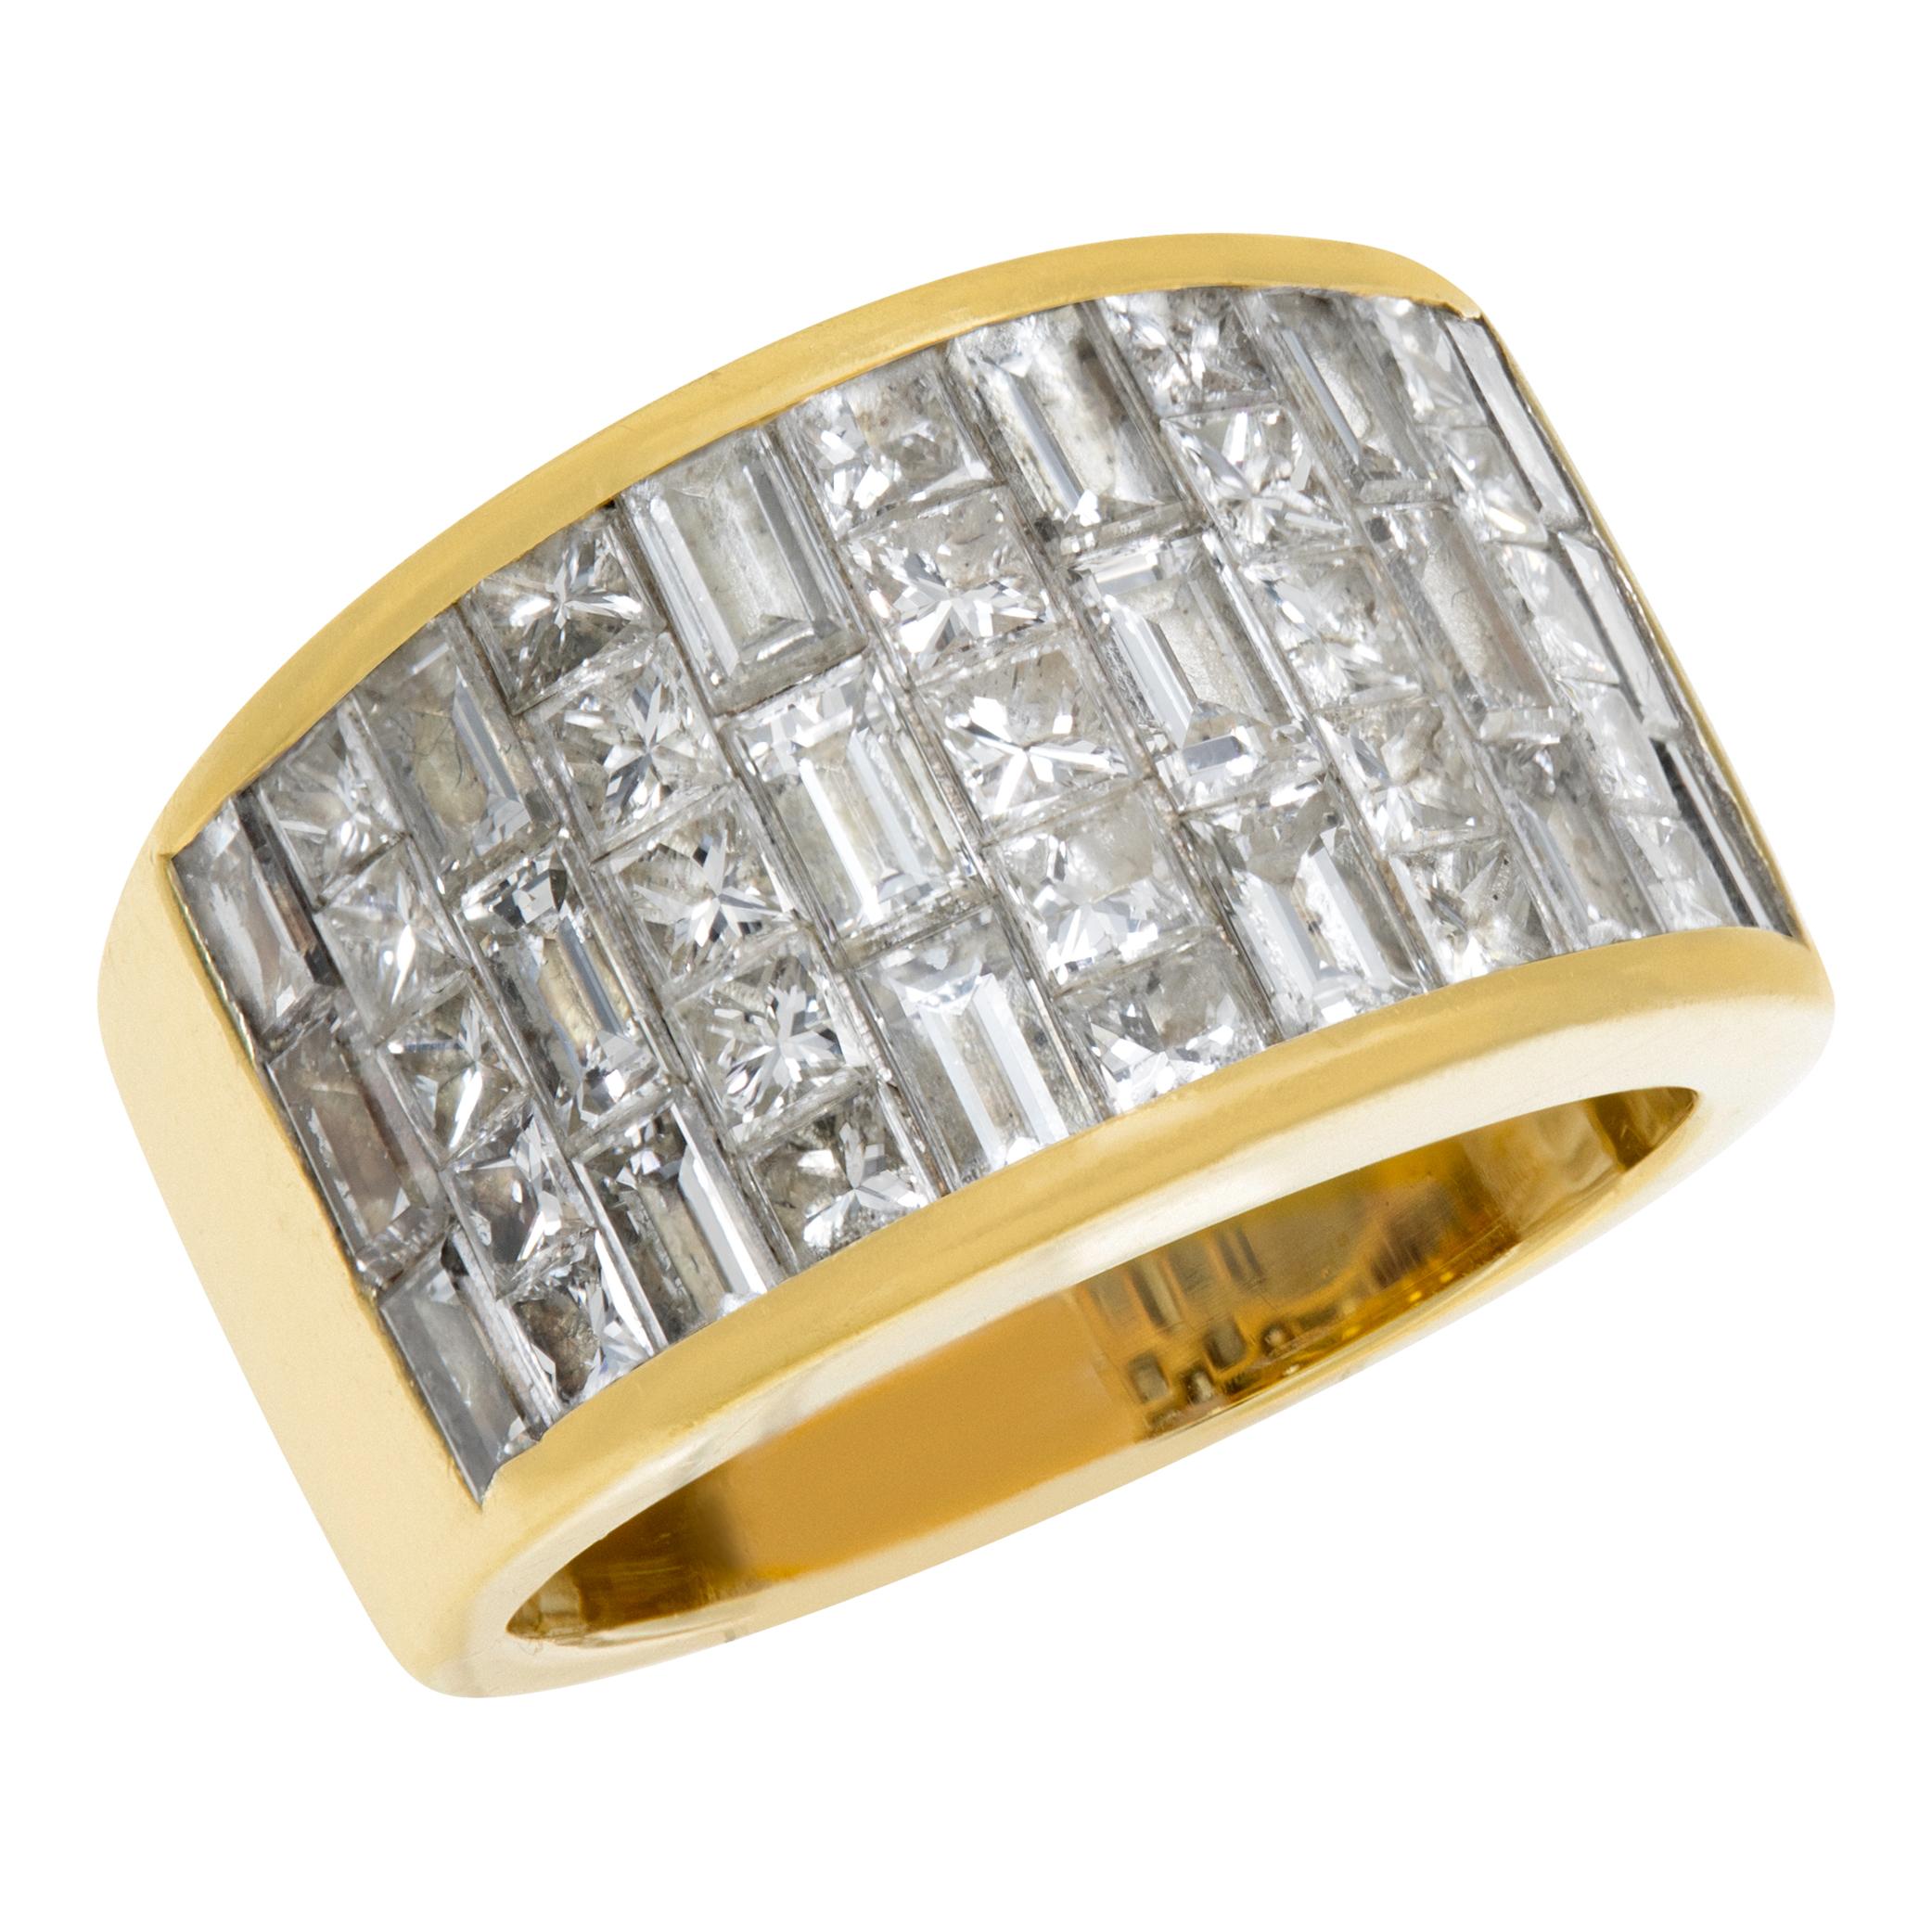 Baguette & pincess cut diamonds ring in yellow gold In Excellent Condition For Sale In Surfside, FL